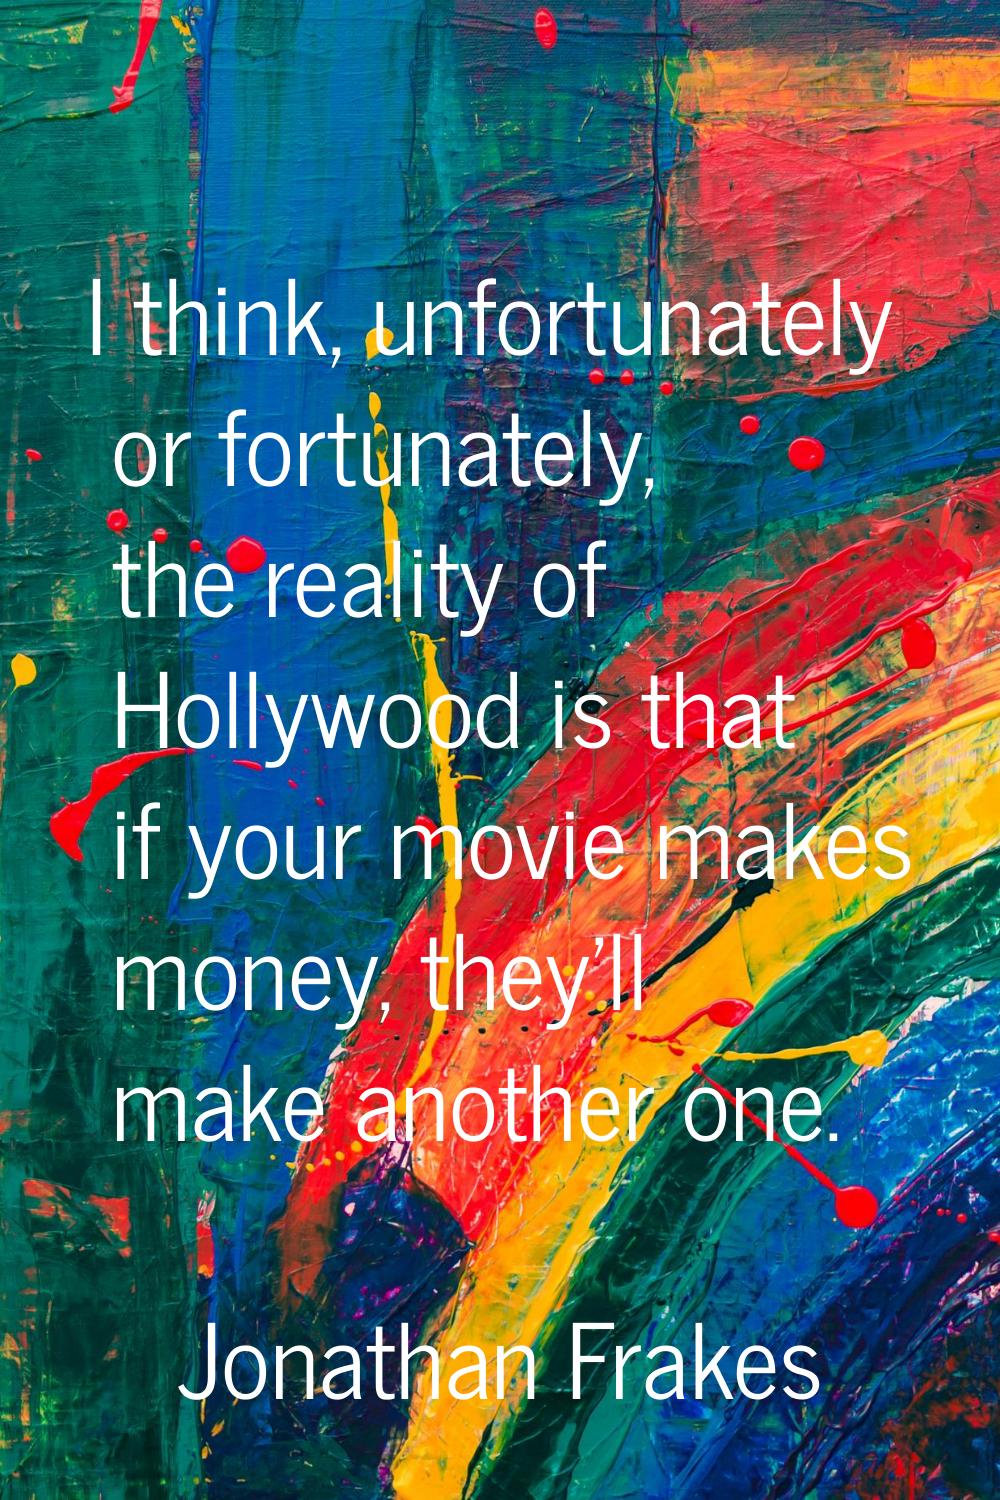 I think, unfortunately or fortunately, the reality of Hollywood is that if your movie makes money, 